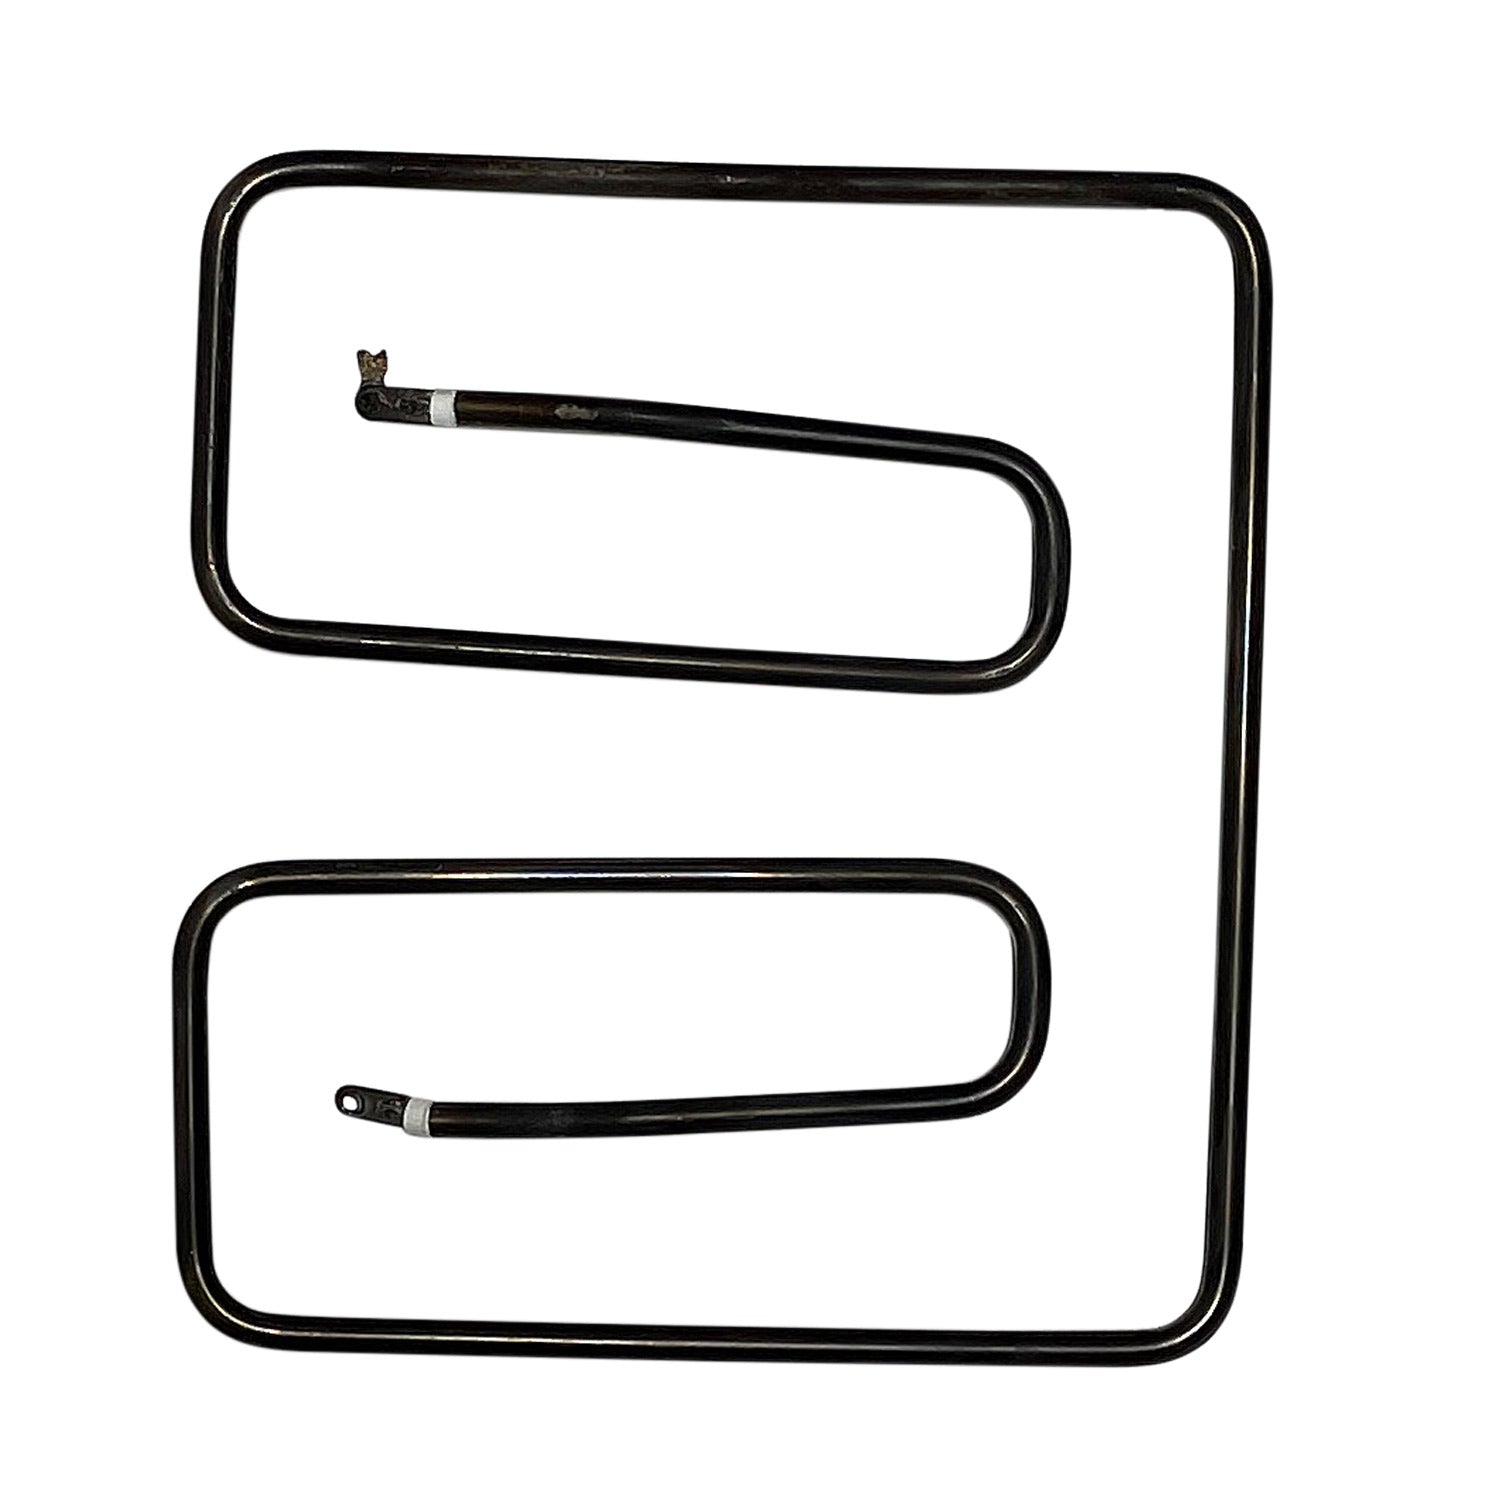 P_APG-HE1 Heating Elements | Replacement Parts for Flat Top Griddles | 1 Pcs